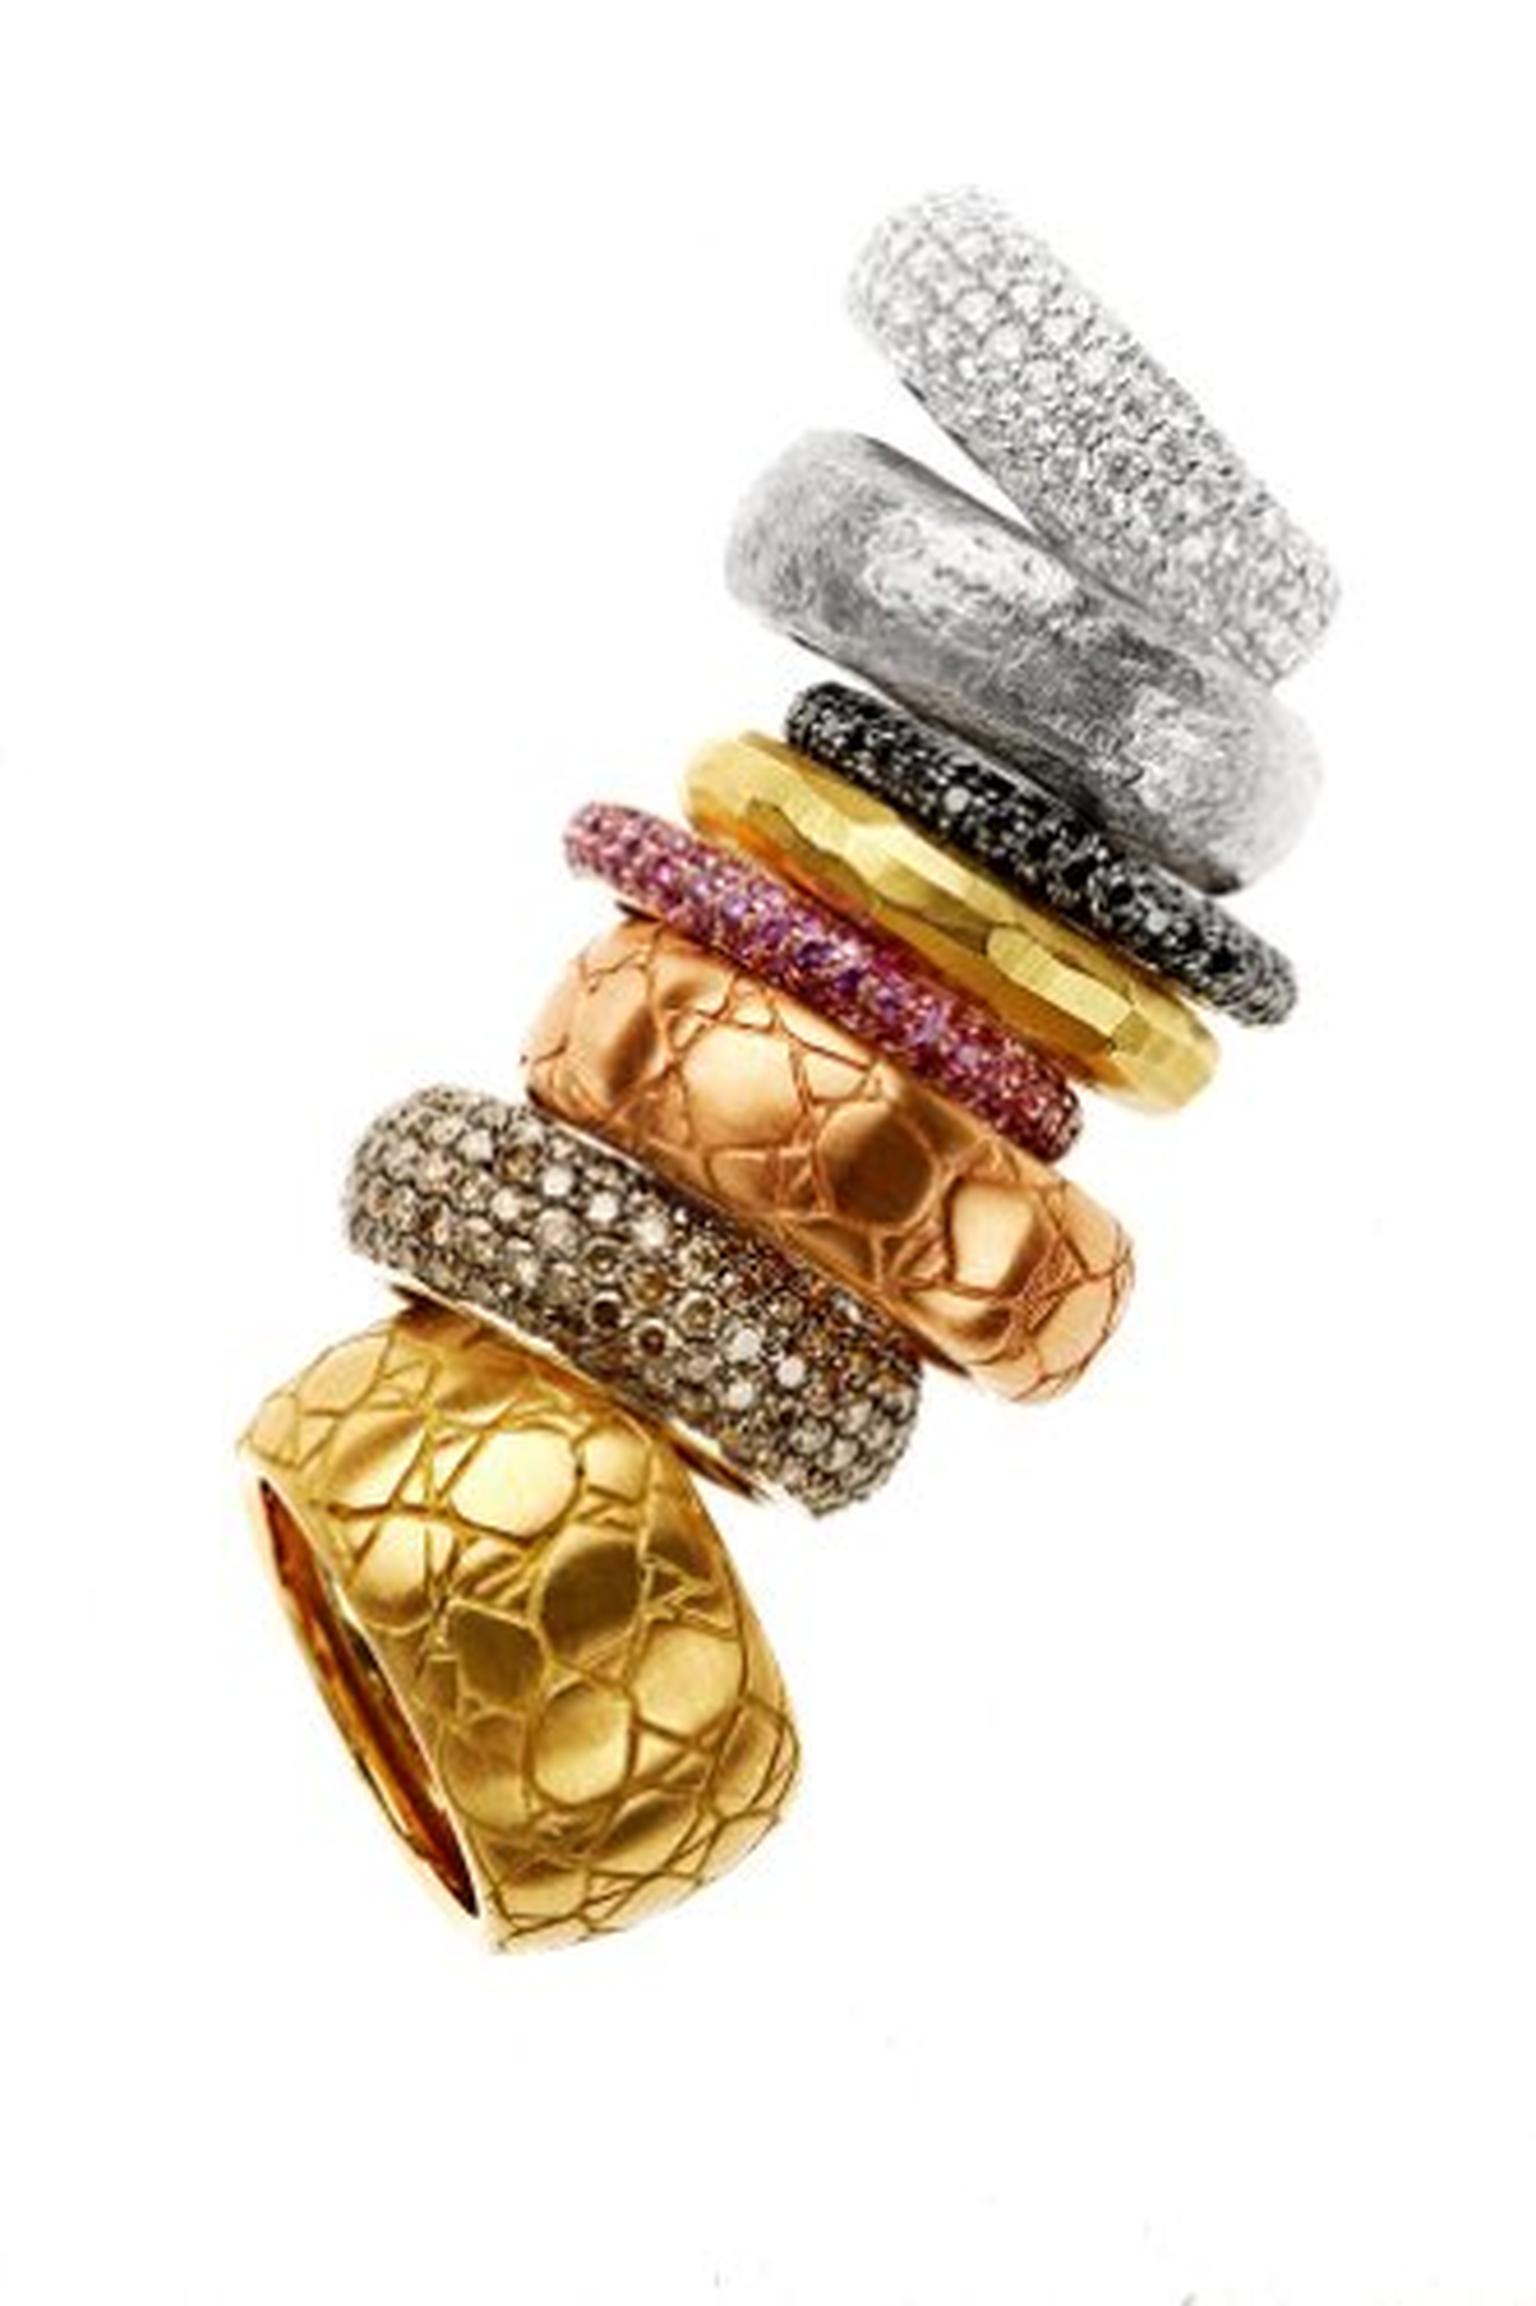 10) Rings from Texturas collection.jpg